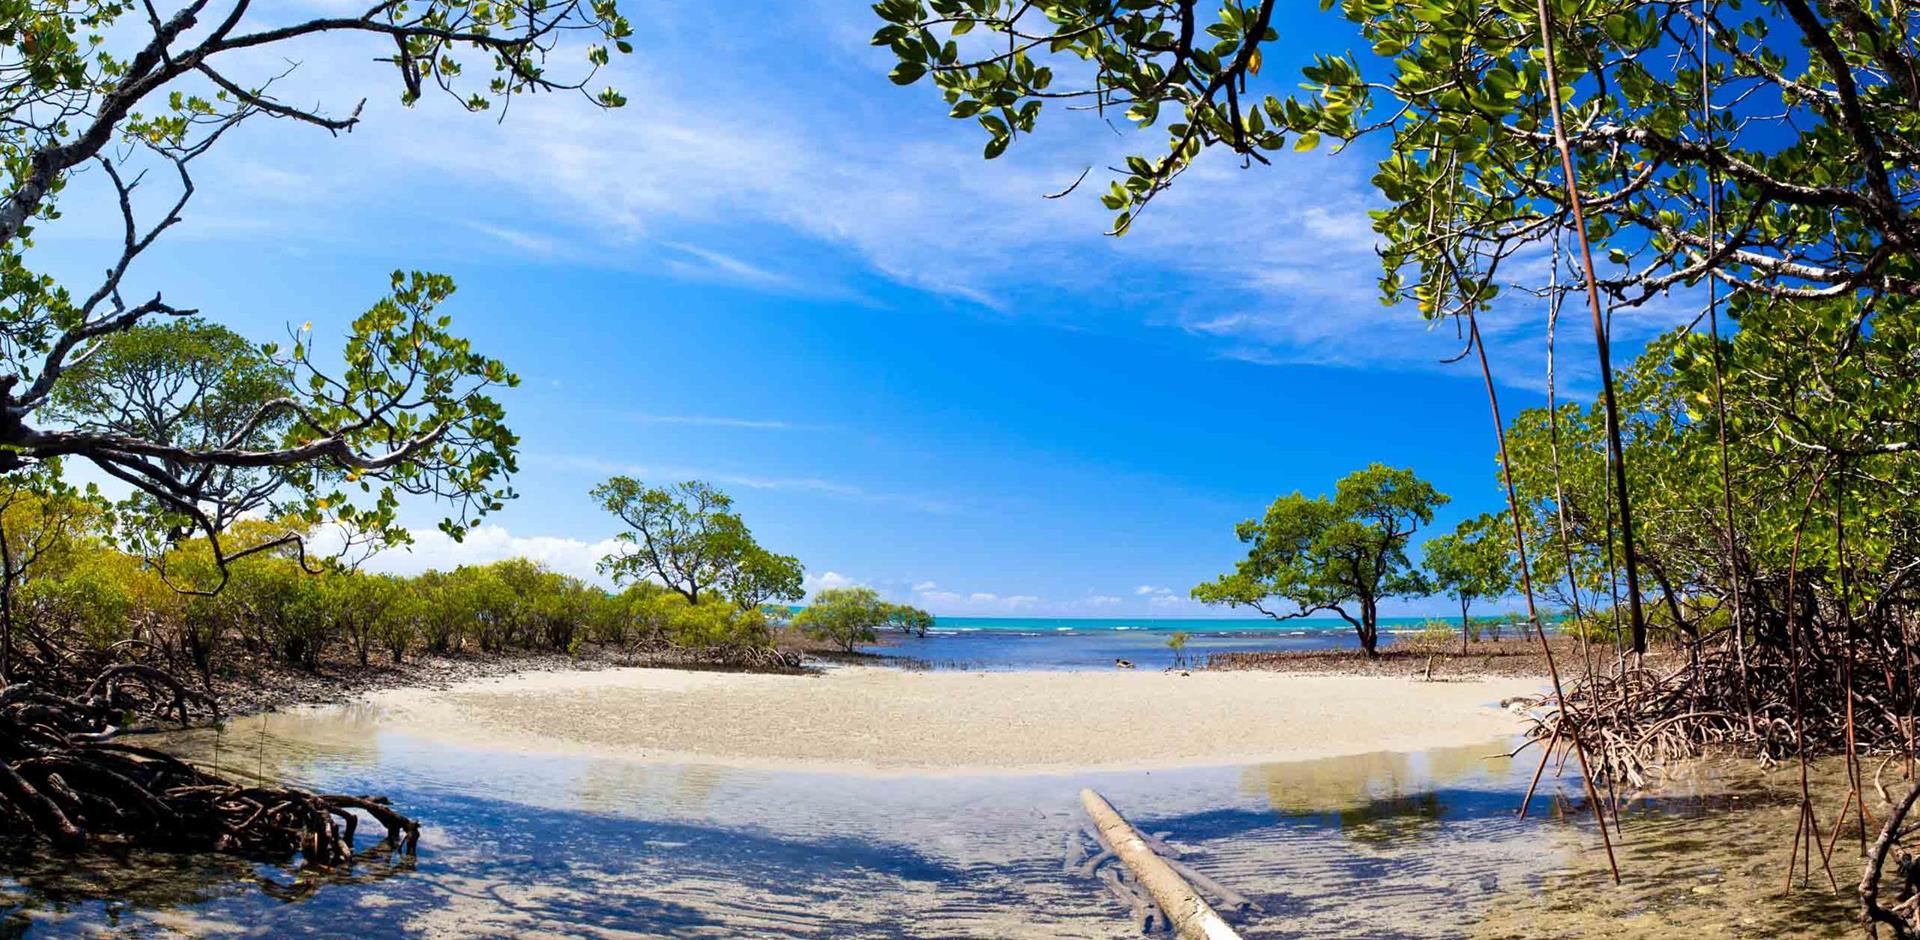 See some of Australia's highlights on a luxury holiday to Port Douglas with A&K